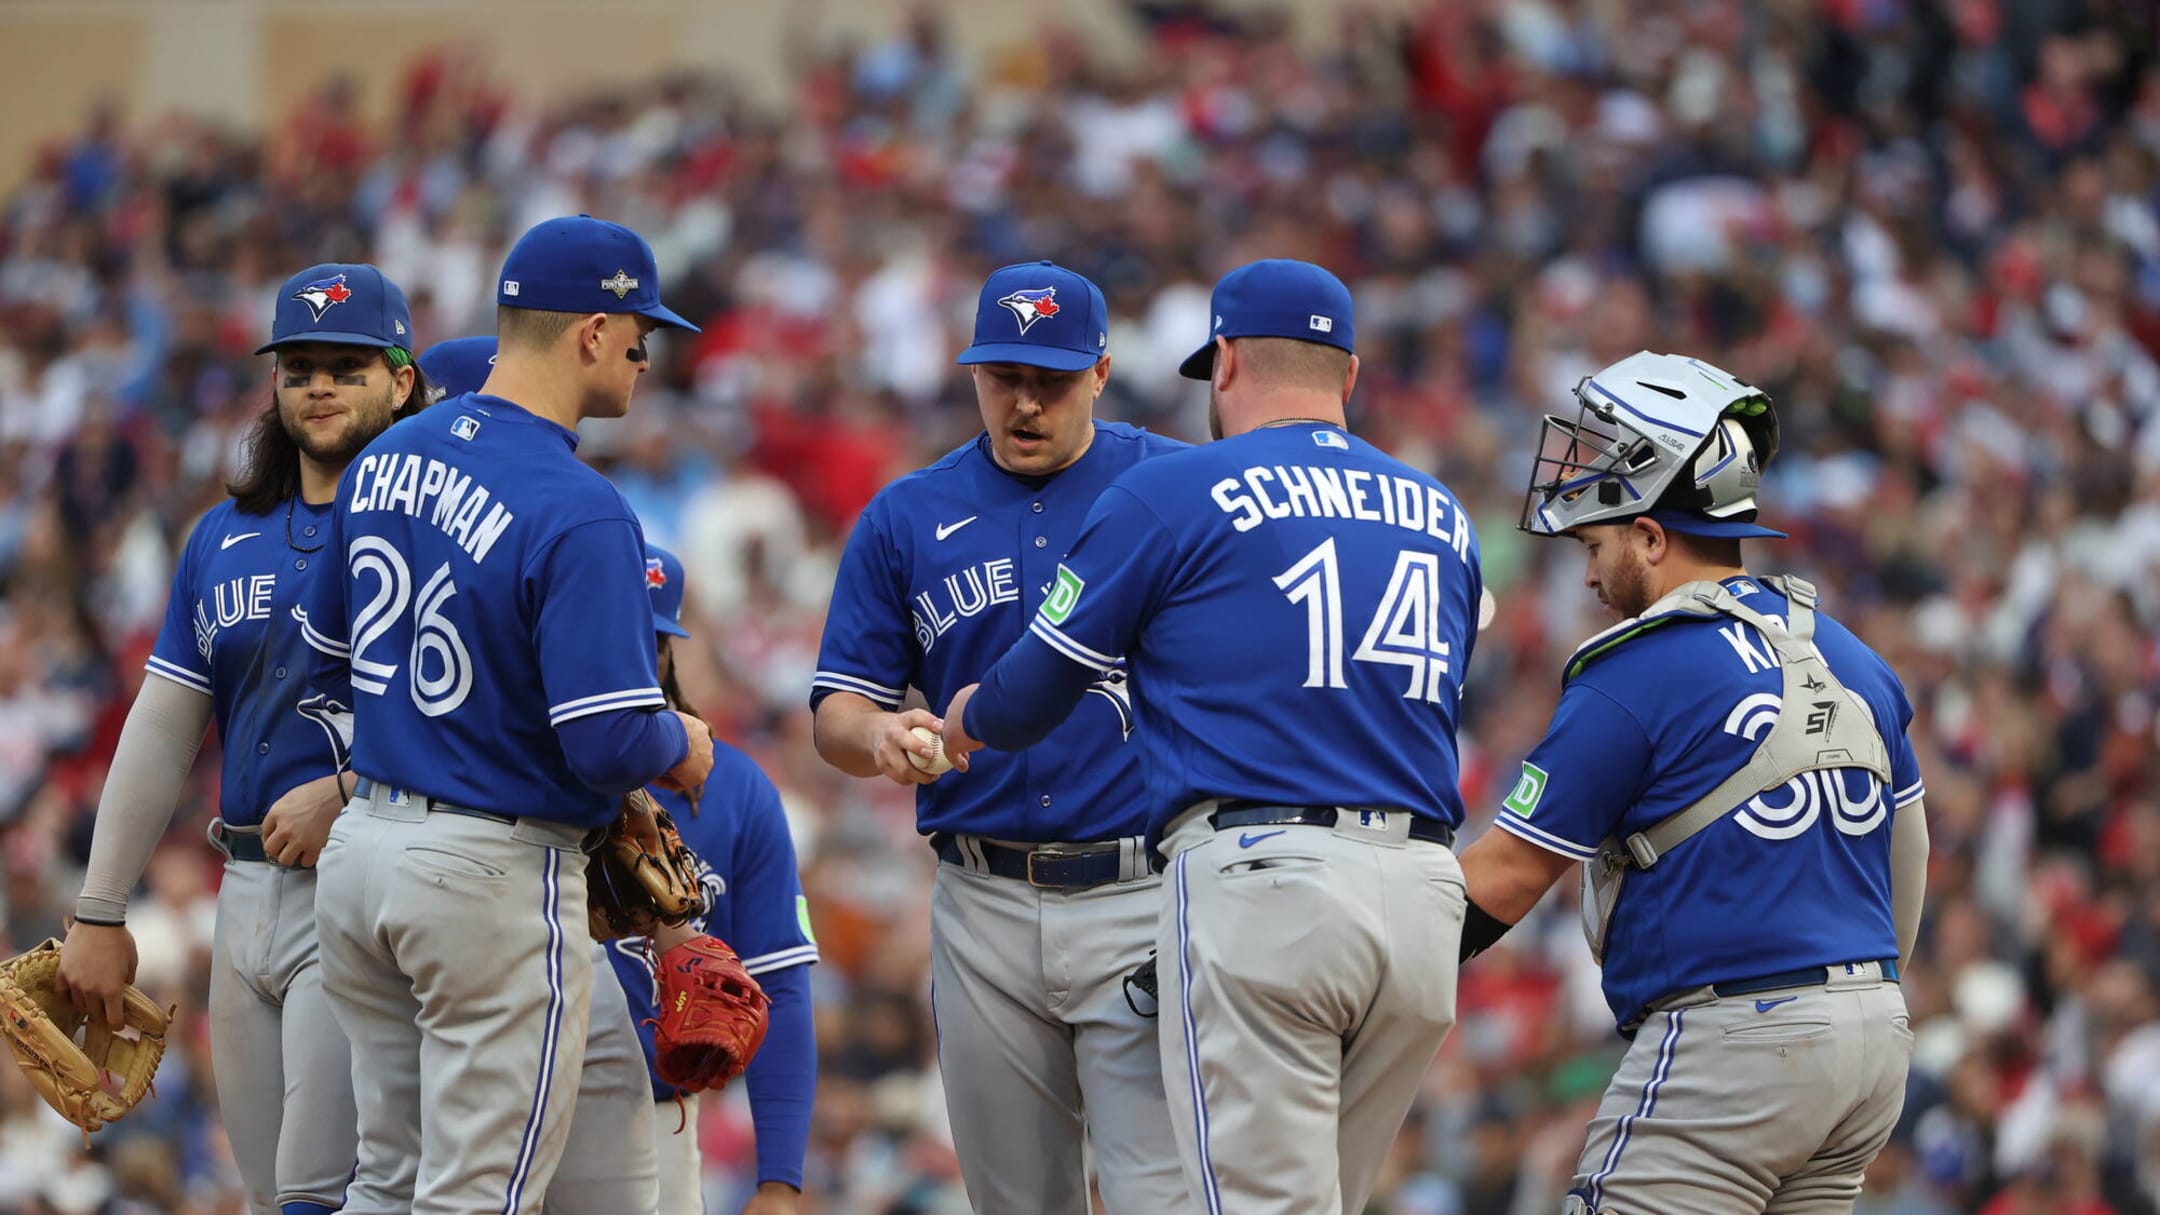 Blue Jays fans infuriated by manager's decision to pull Jose